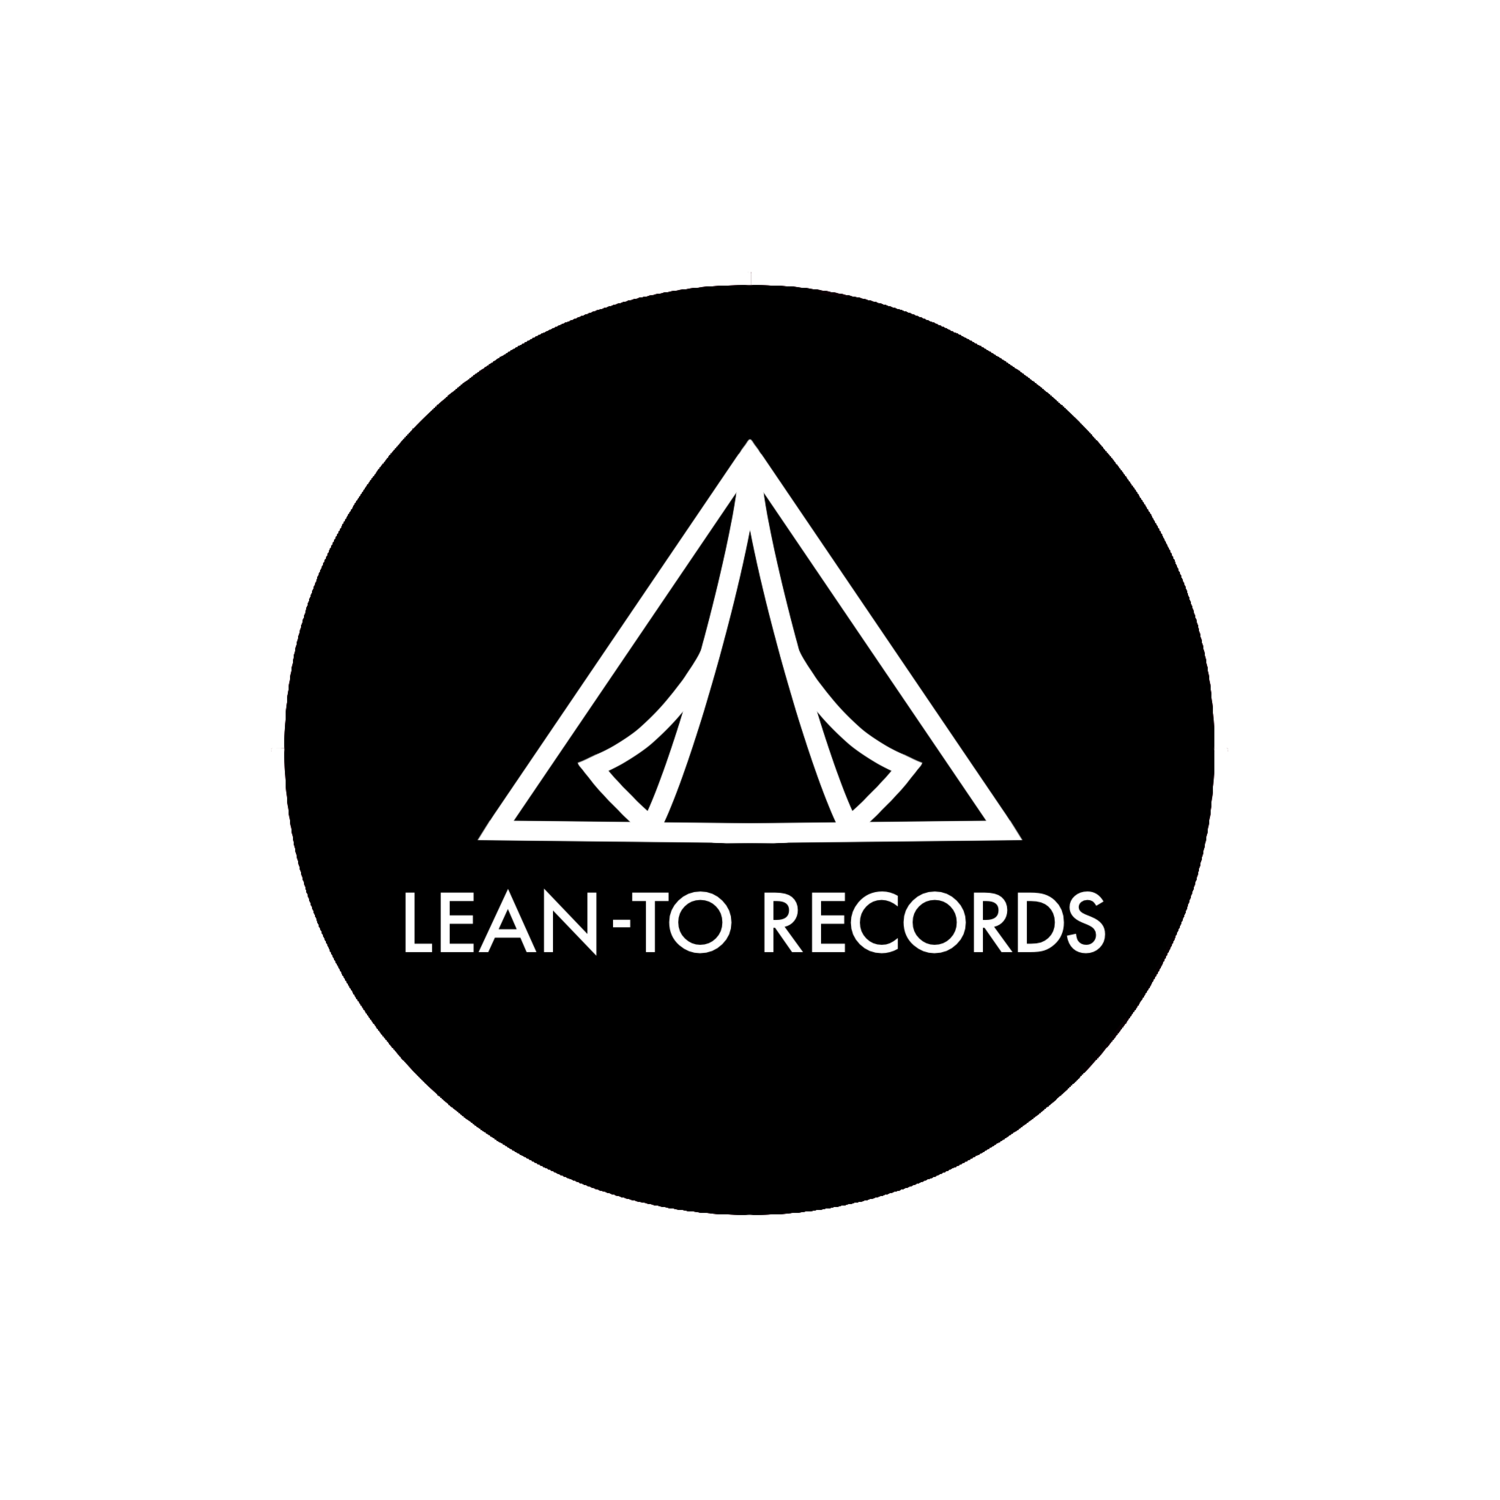 LEAN-TO RECORDS